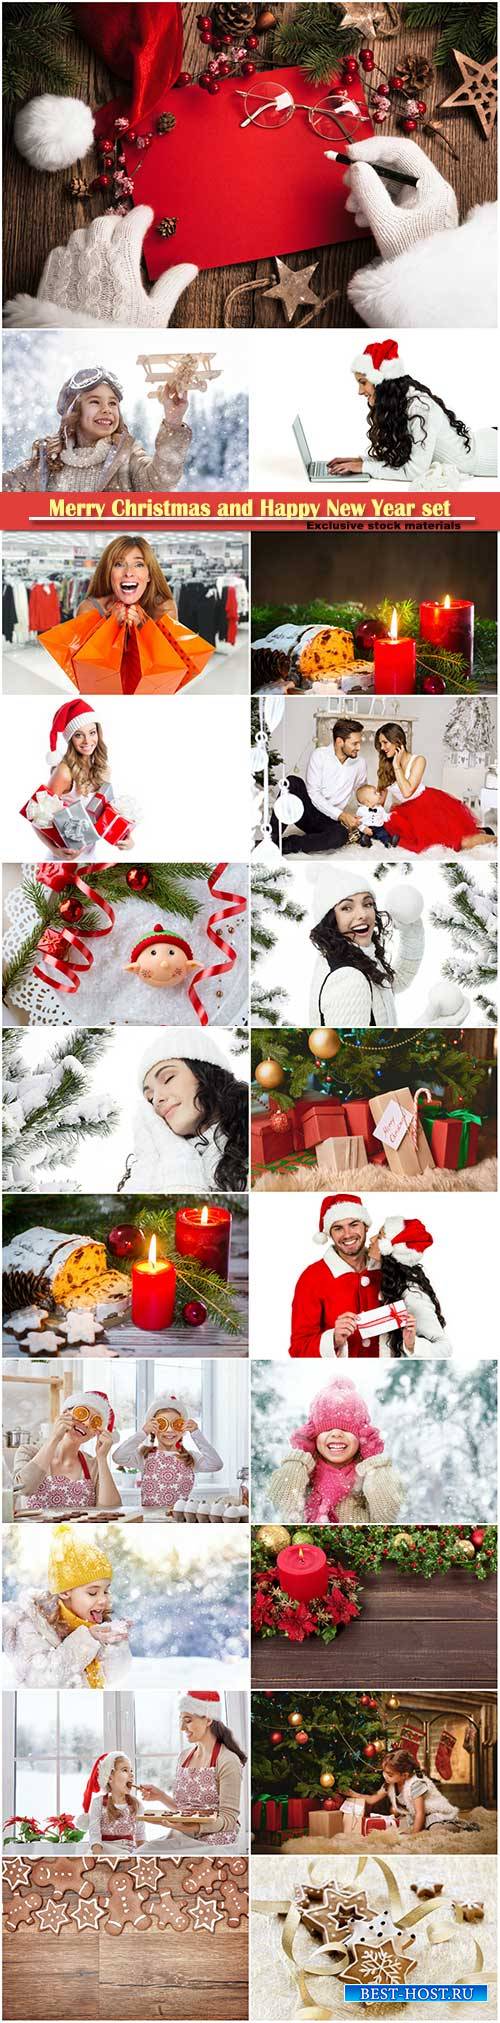 Merry Christmas and Happy New Year stock set # 6